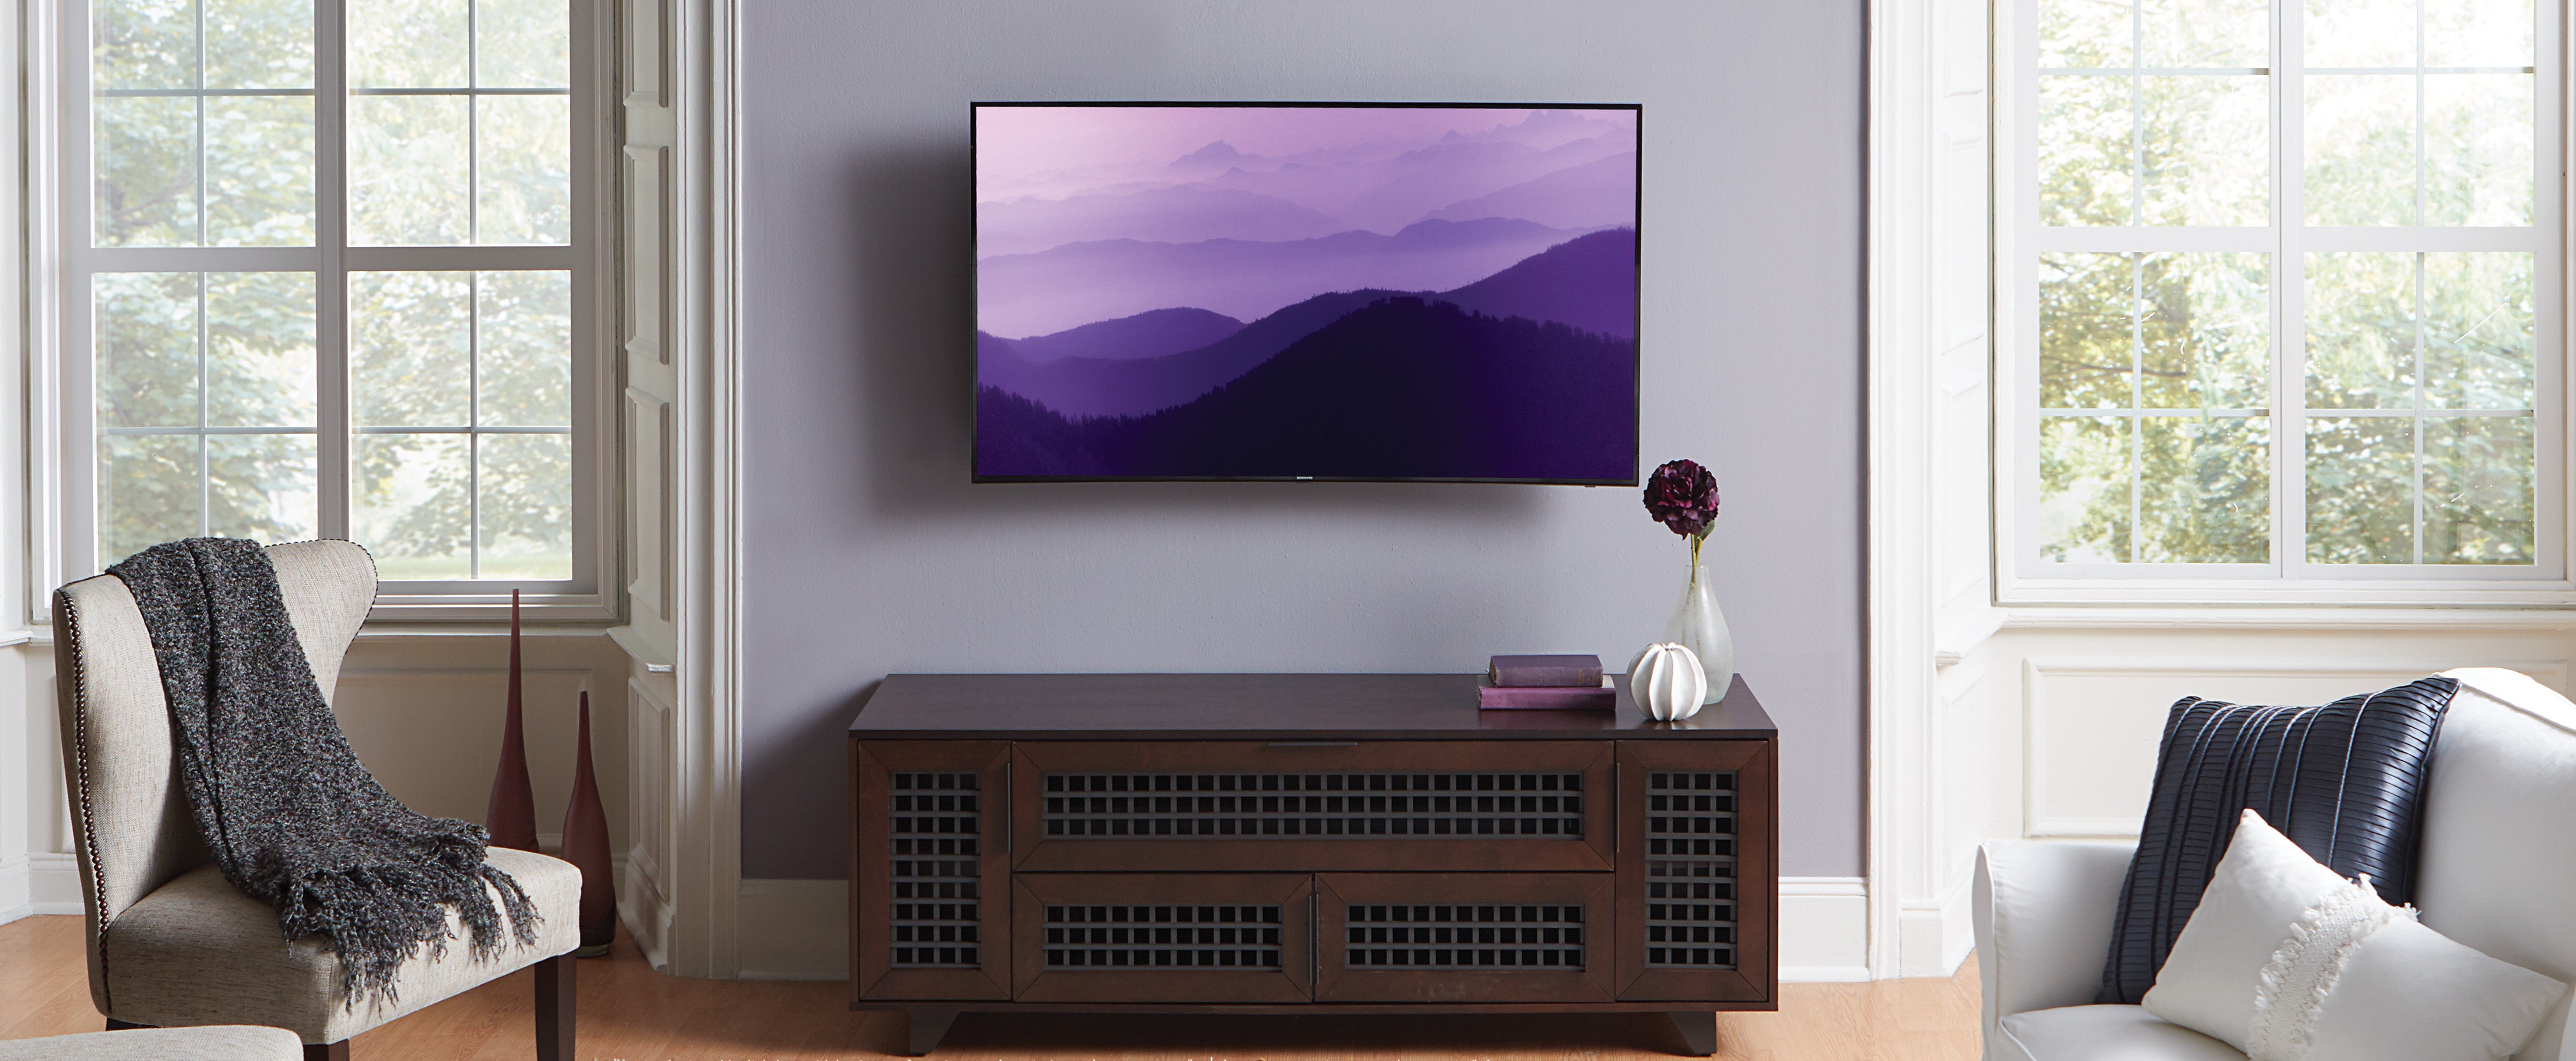 Choose the Right TV Wall Mount for Your TV: A Guide to Sanus Products